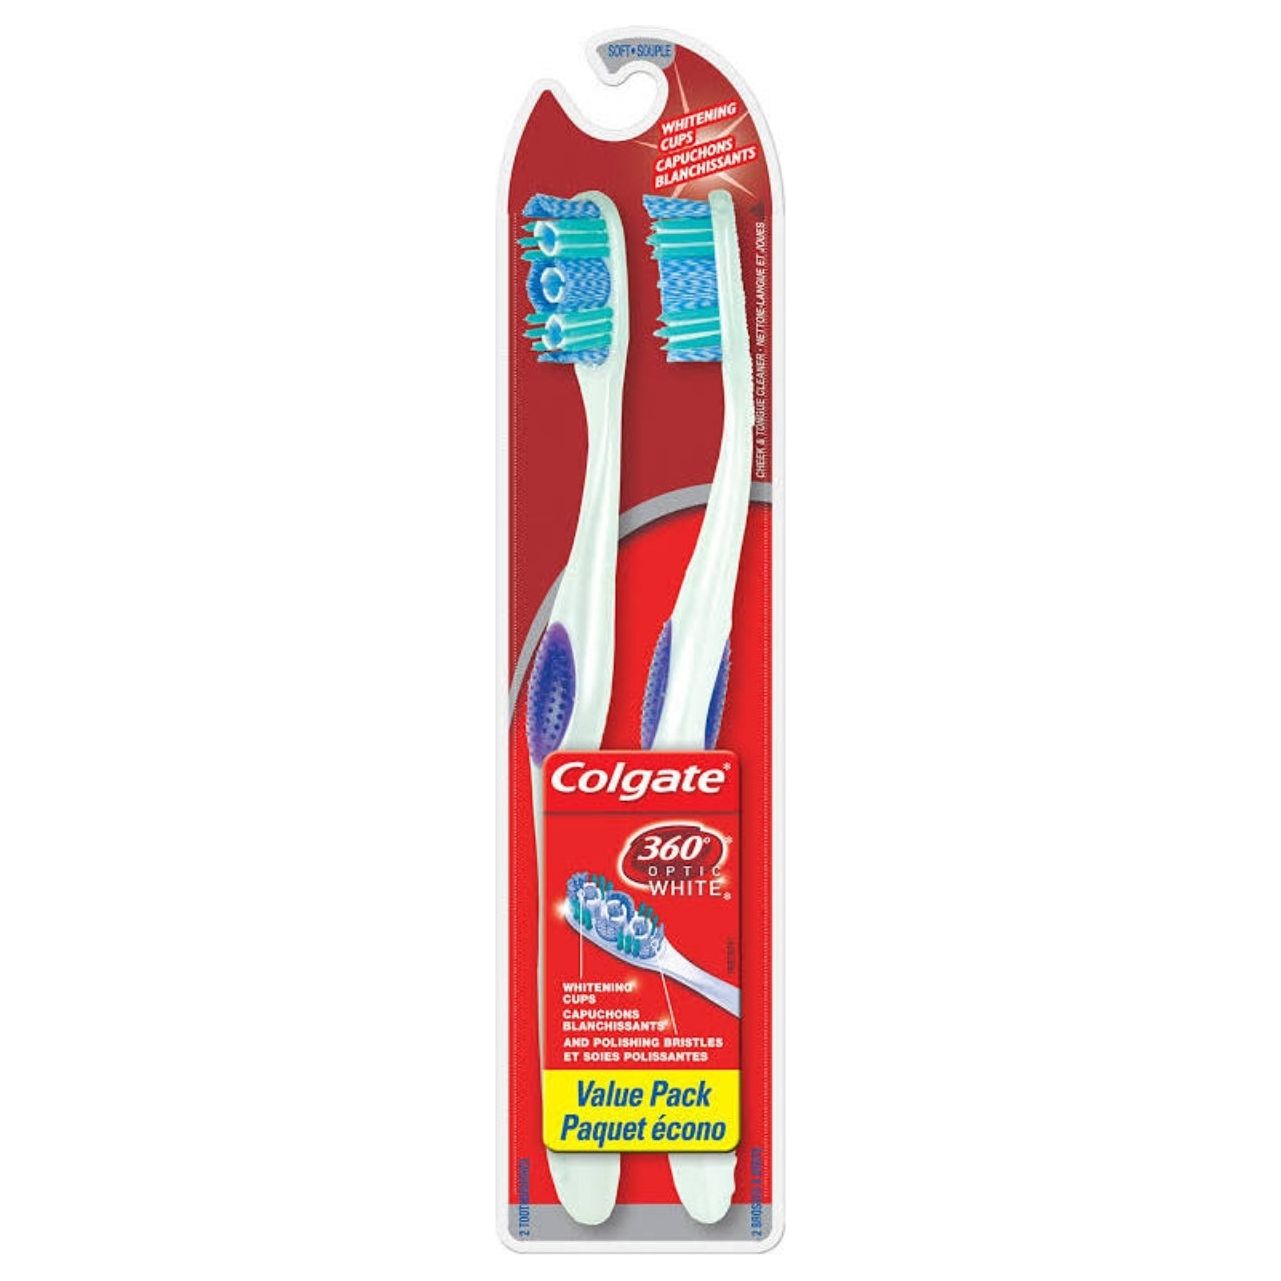 Colgate Value Pack Toothbrushes, 2